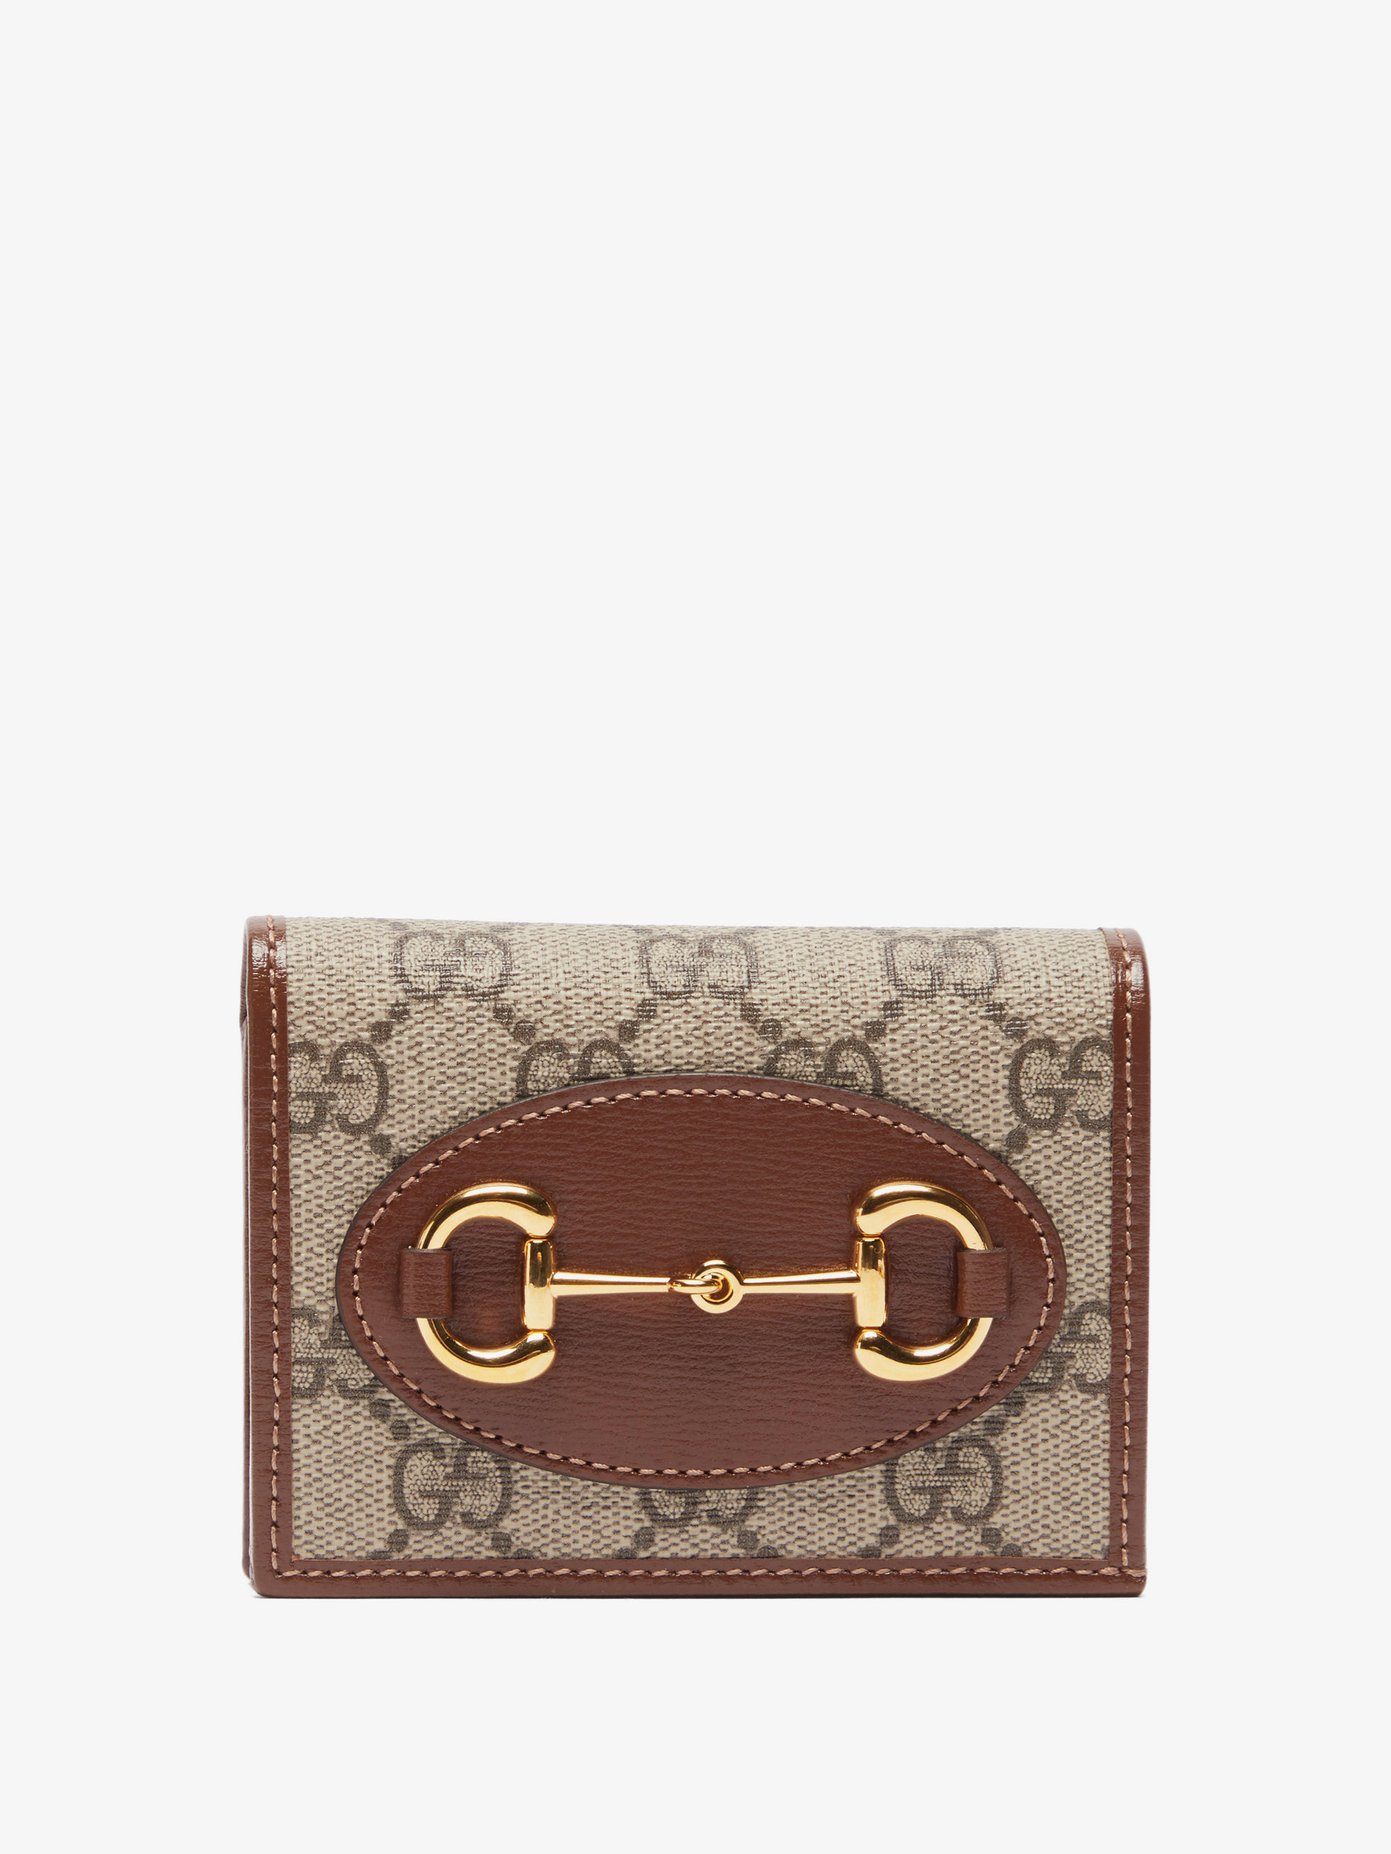 22SS 구찌 1955 홀스빗 반지갑 Gucci Neutral 1955 Horsebit GG-canvas and leather wallet